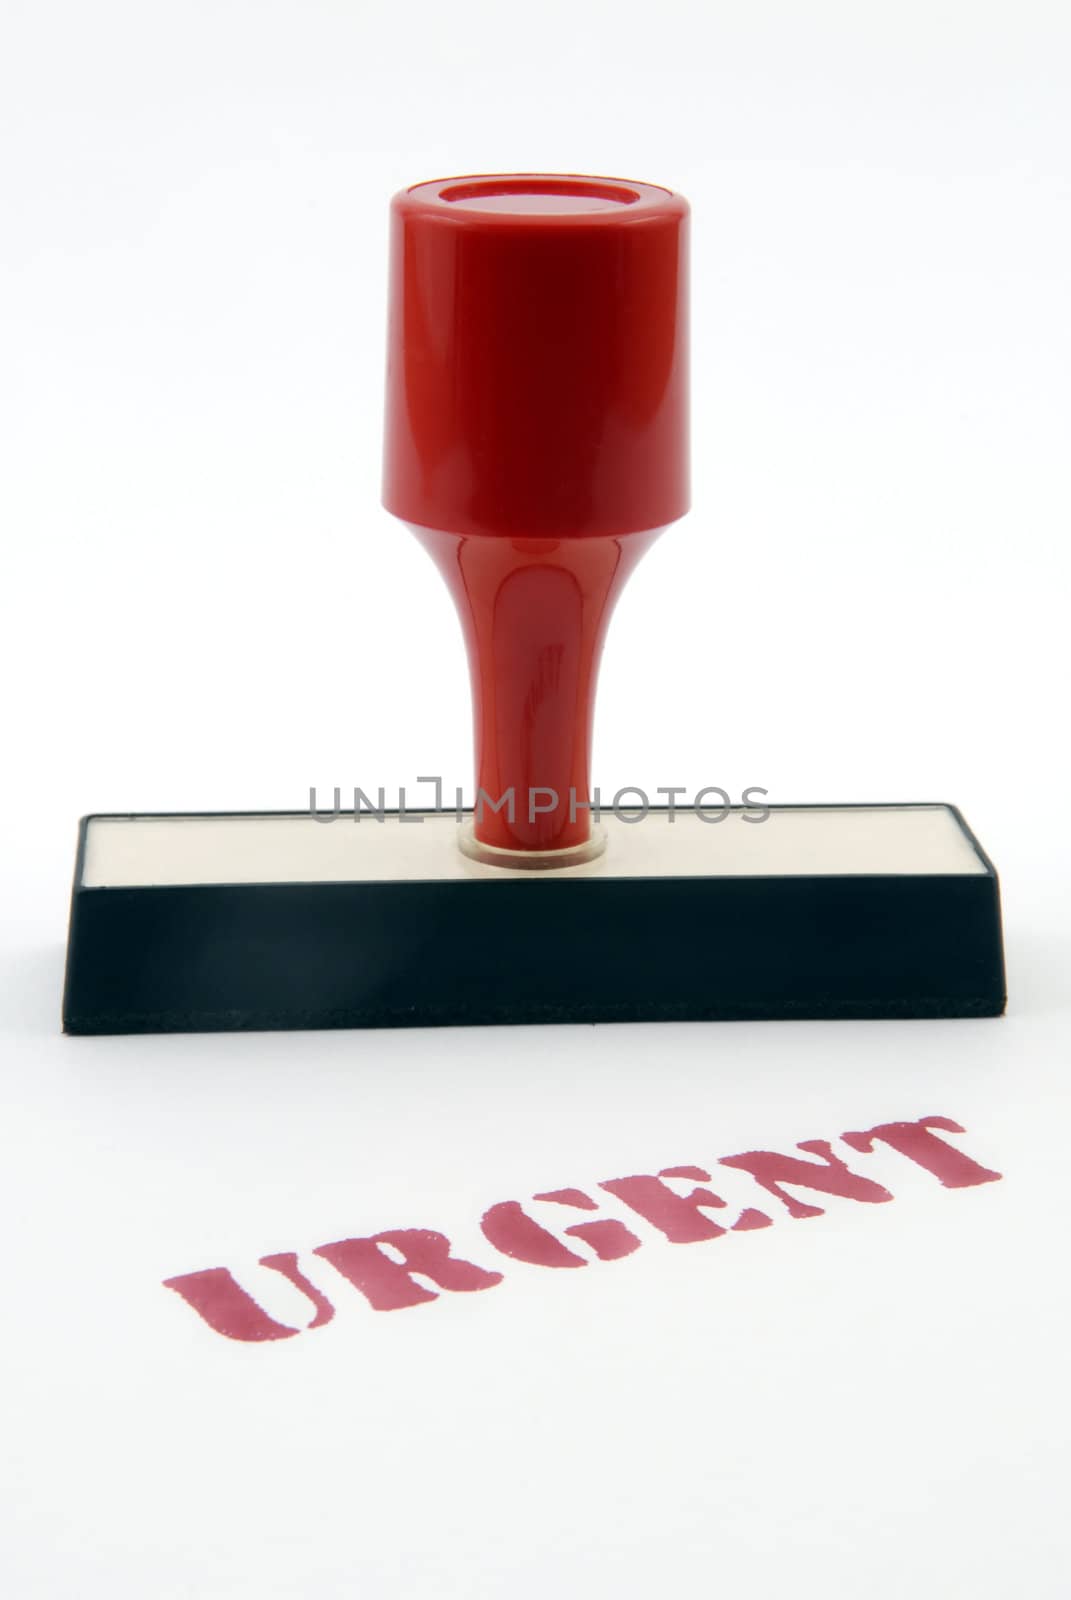 Urgent rubber stamp with red plastic handle